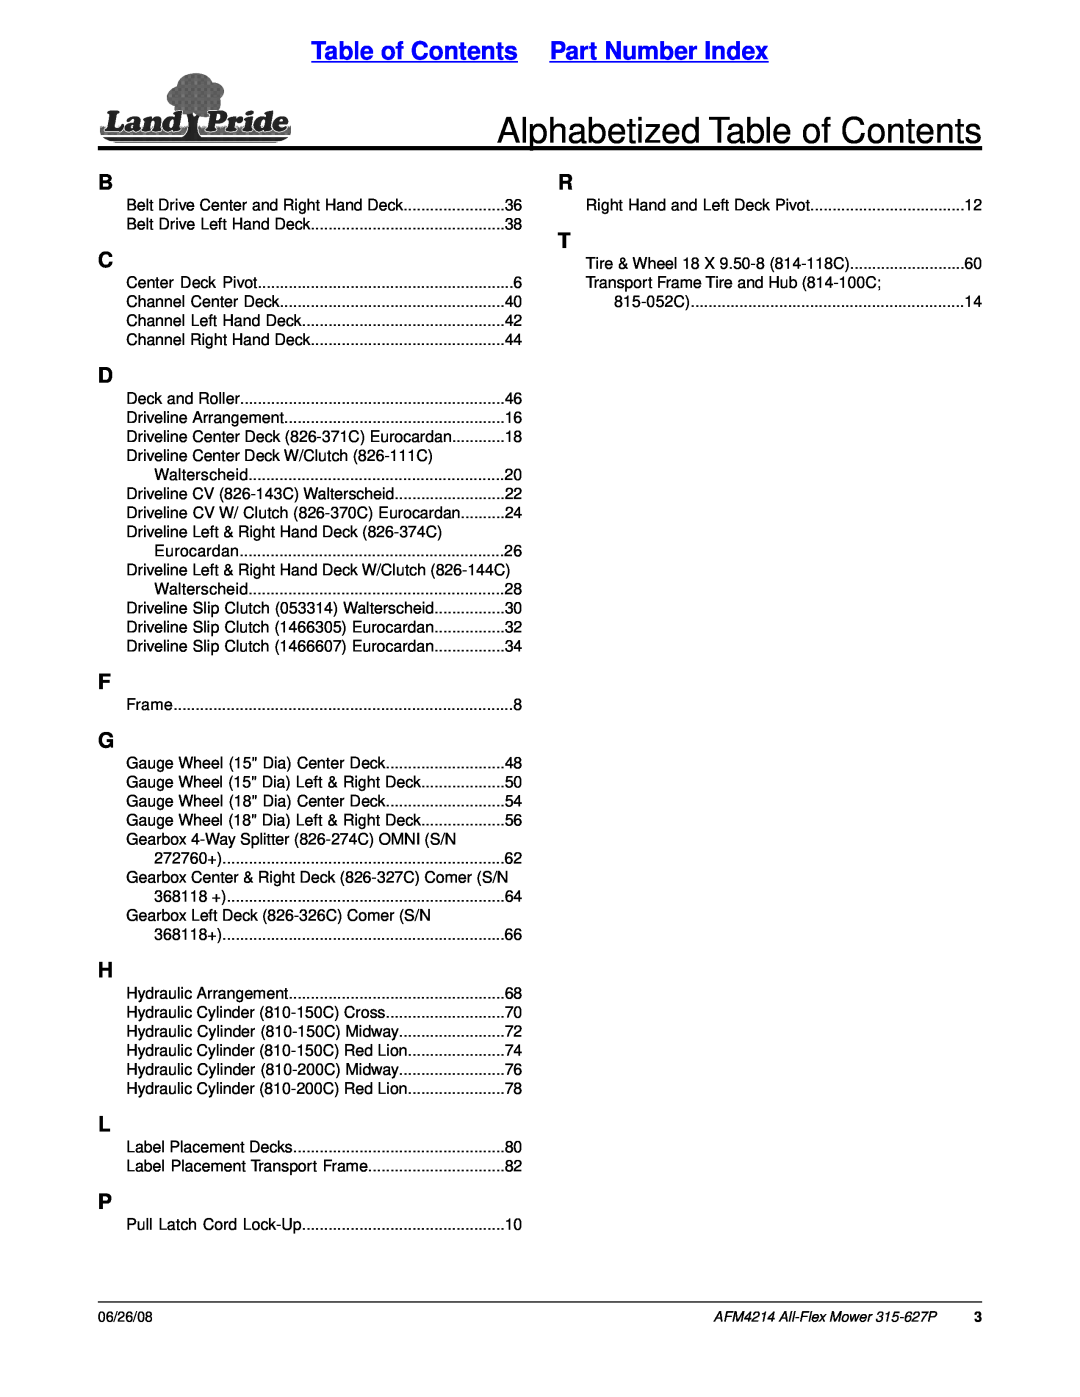 Land Pride AFM4214 manual Alphabetized Table of Contents, Table of Contents Part Number Index 